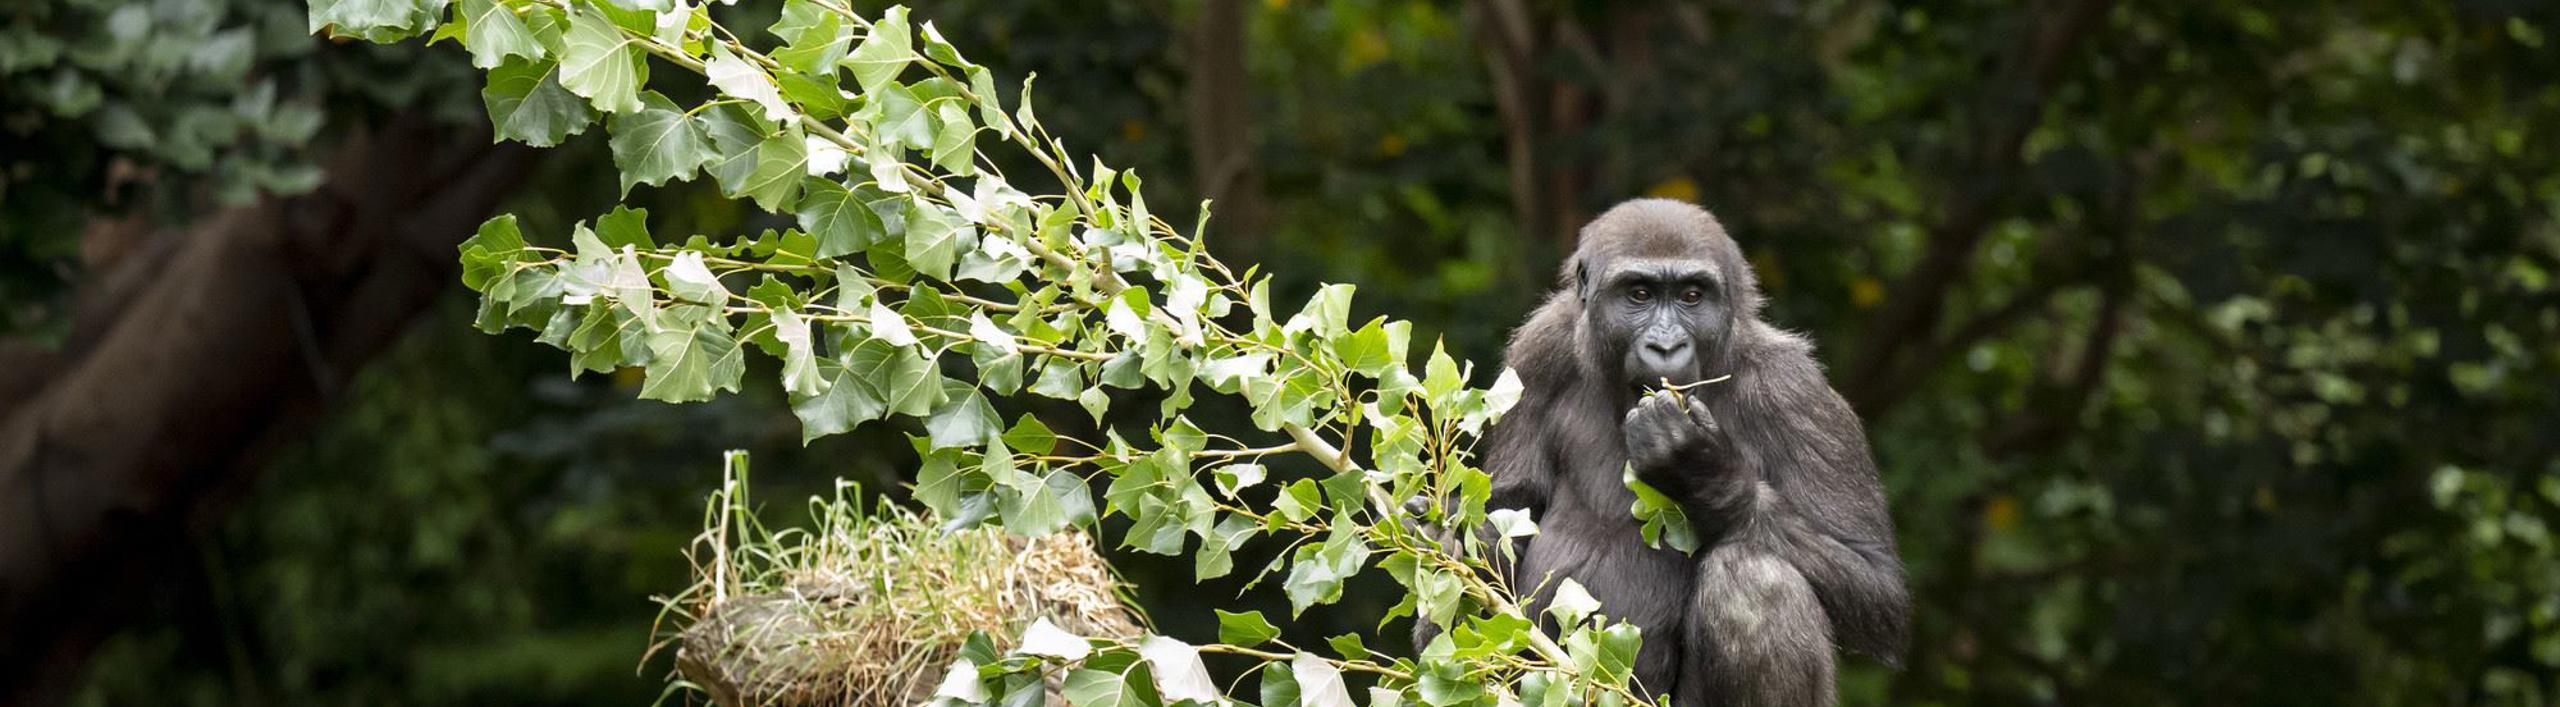 A young gorilla perching on top of a log, eating green leaves.